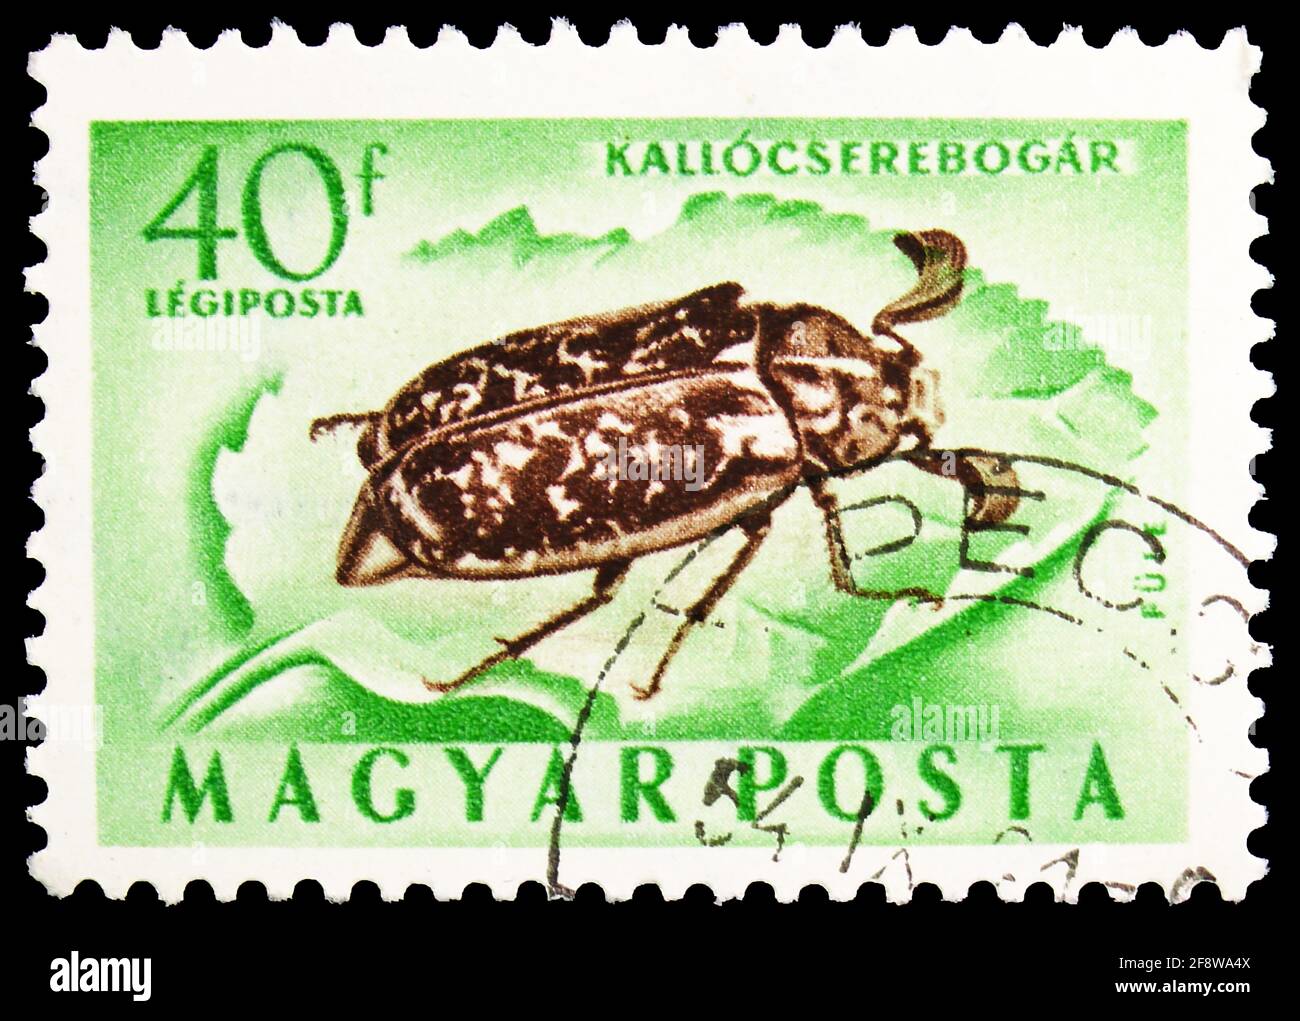 MOSCOW, RUSSIA - OCTOBER 1, 2019: Postage stamp printed in Hungary shows Pine Chafer (Polyphylla fullo), Insects serie, circa 1954 Stock Photo